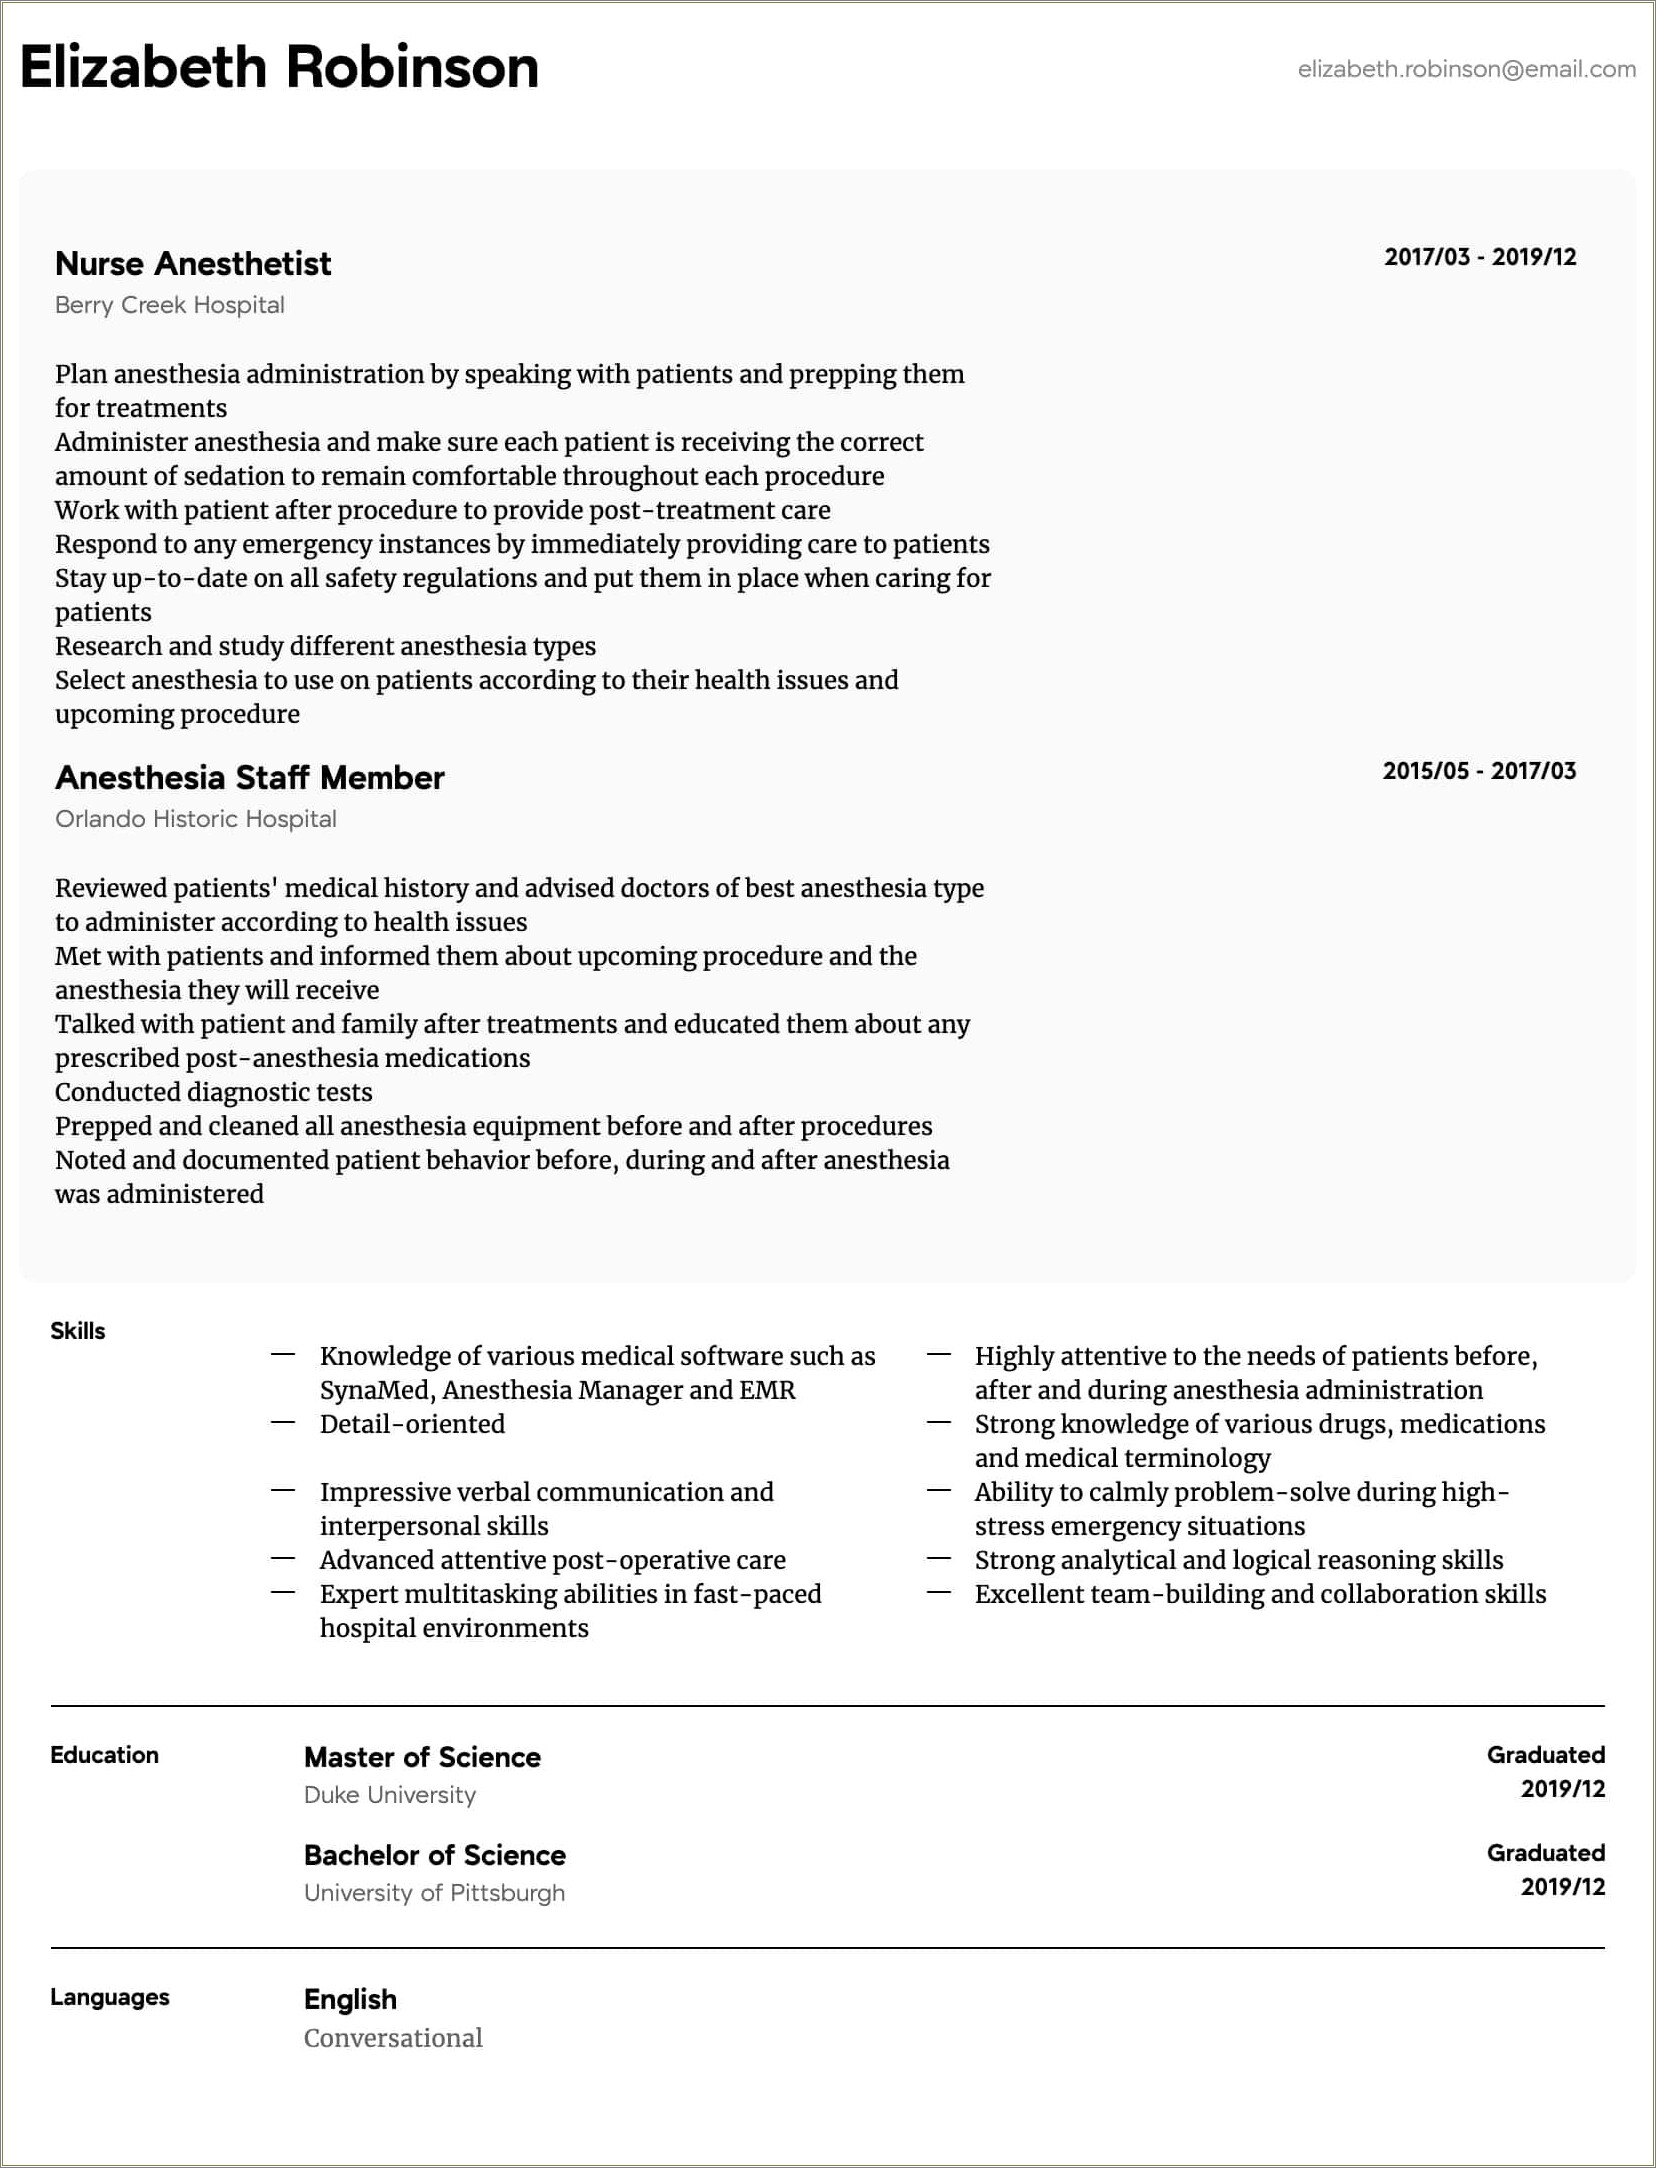 Years Of Experience 2019 Resume Healthcare